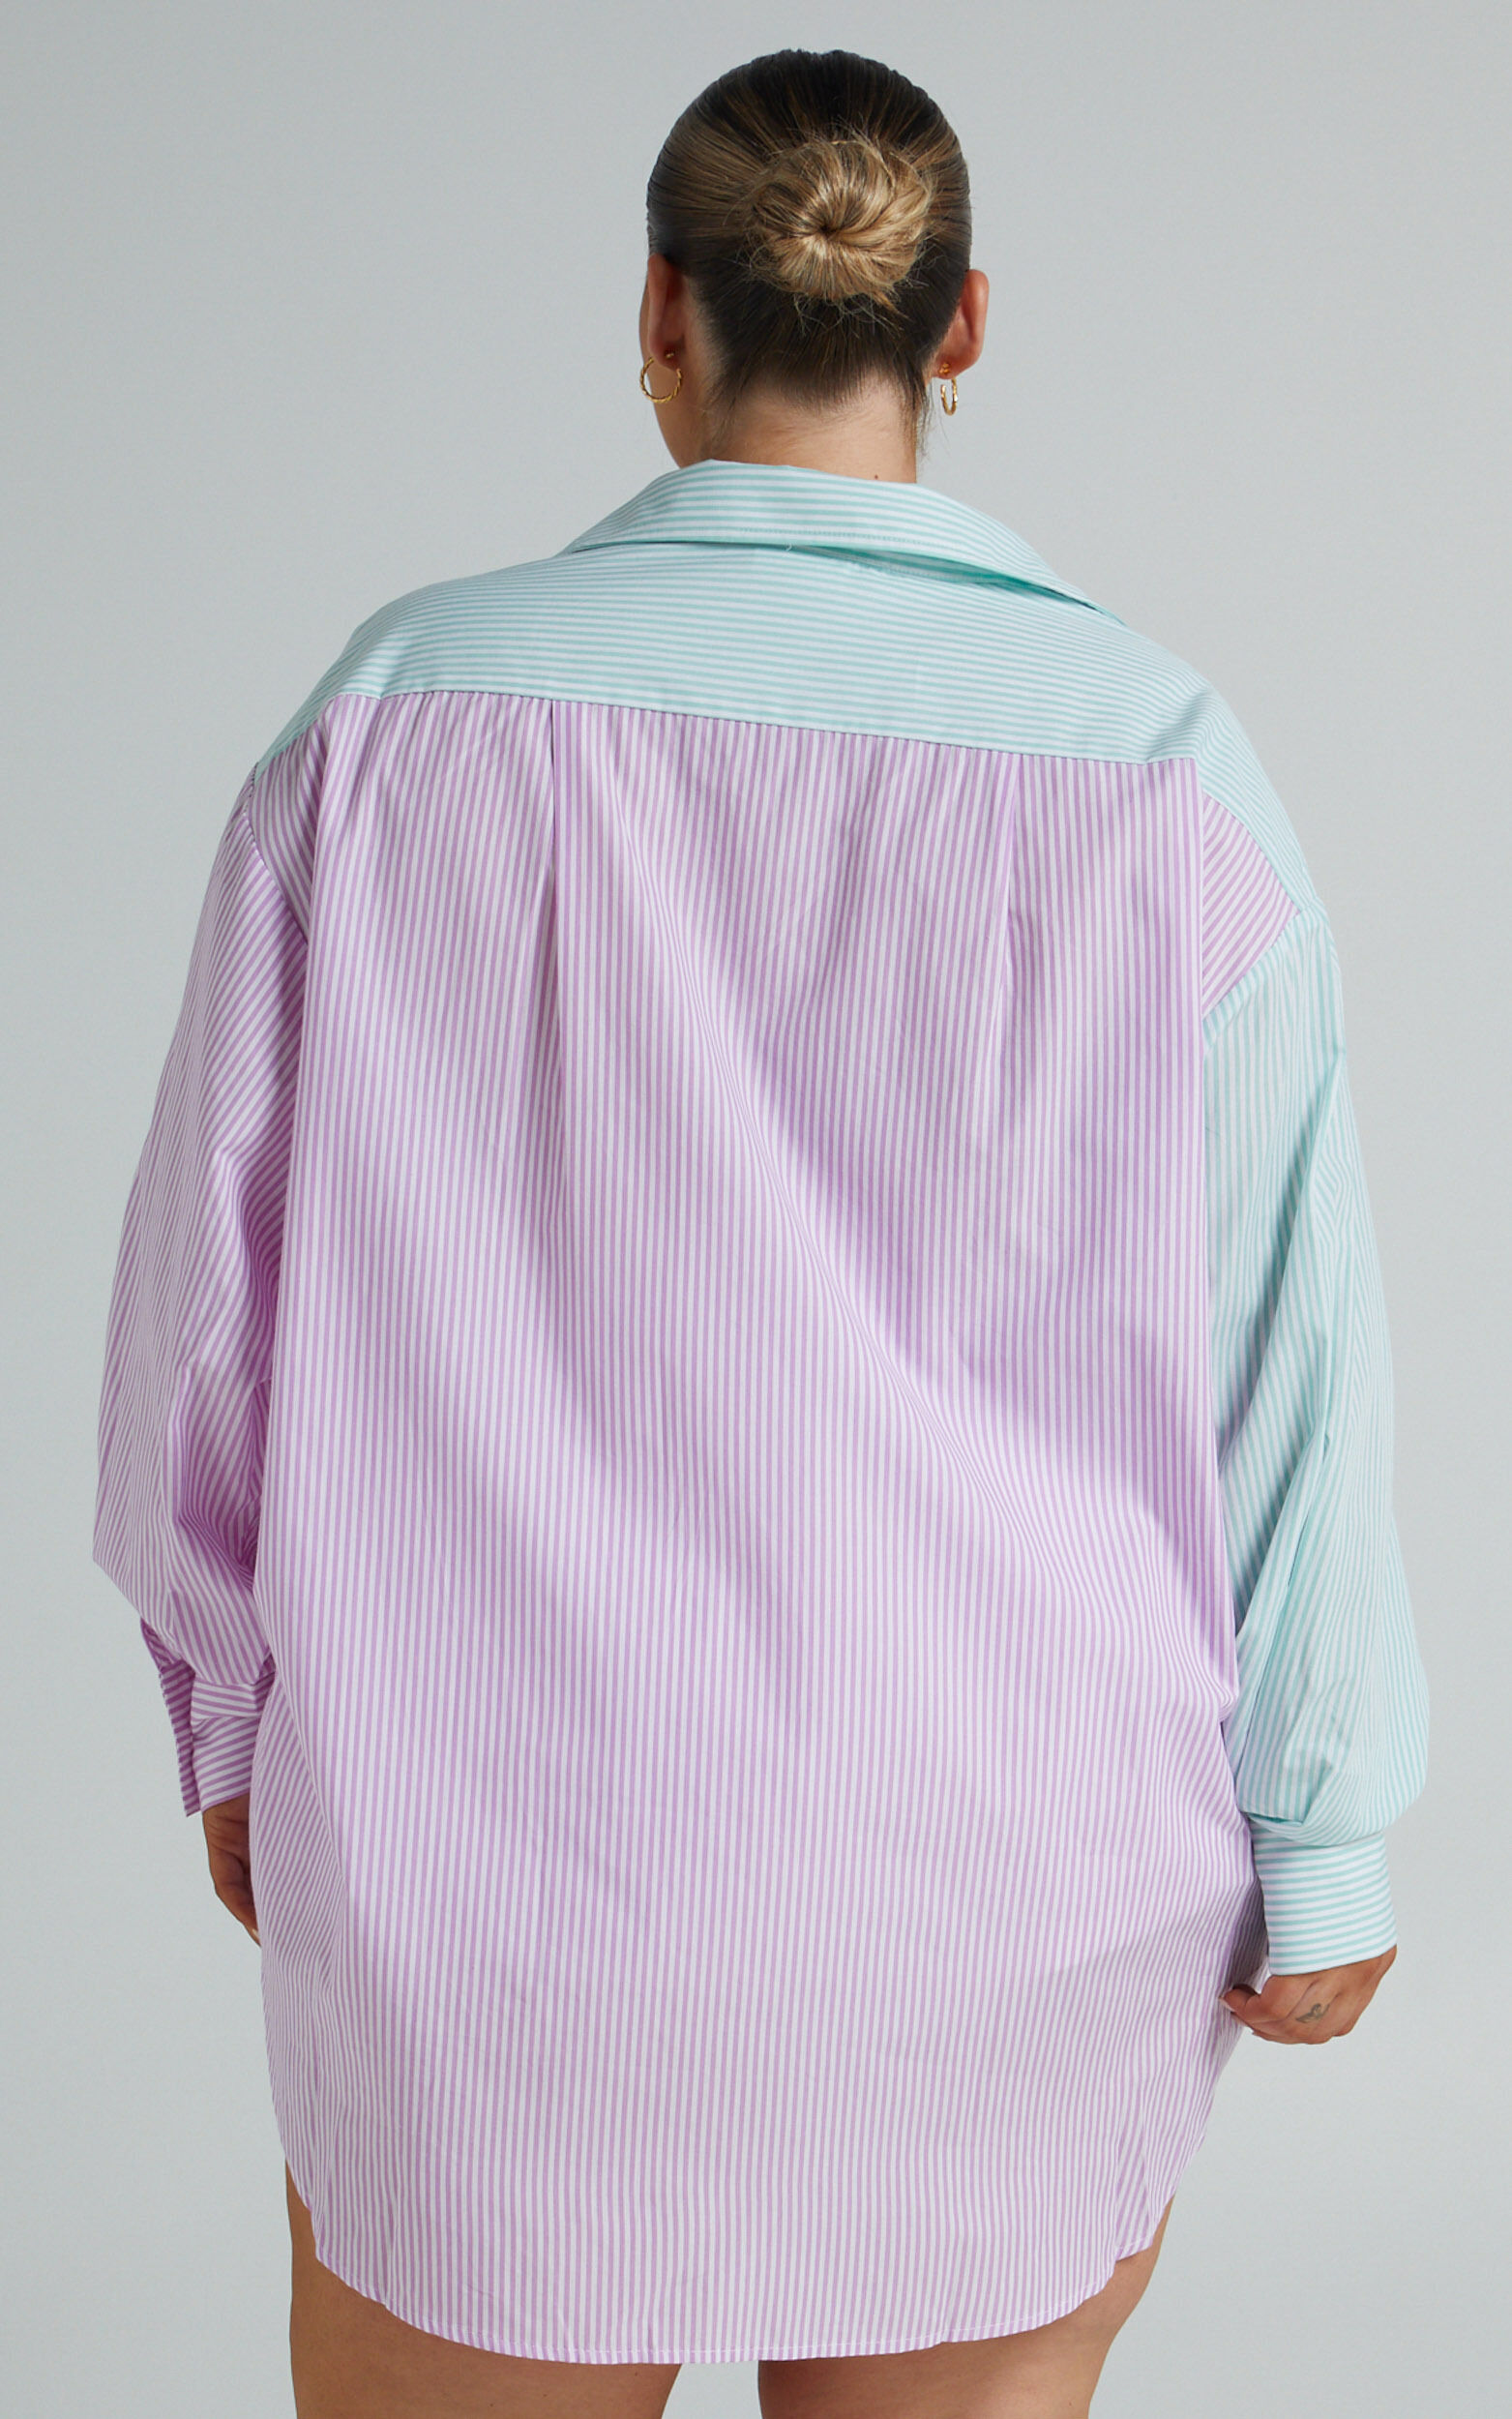 Autumn Shirt - Contrast Stripe Oversized Shirt in LILAC AND BLUE